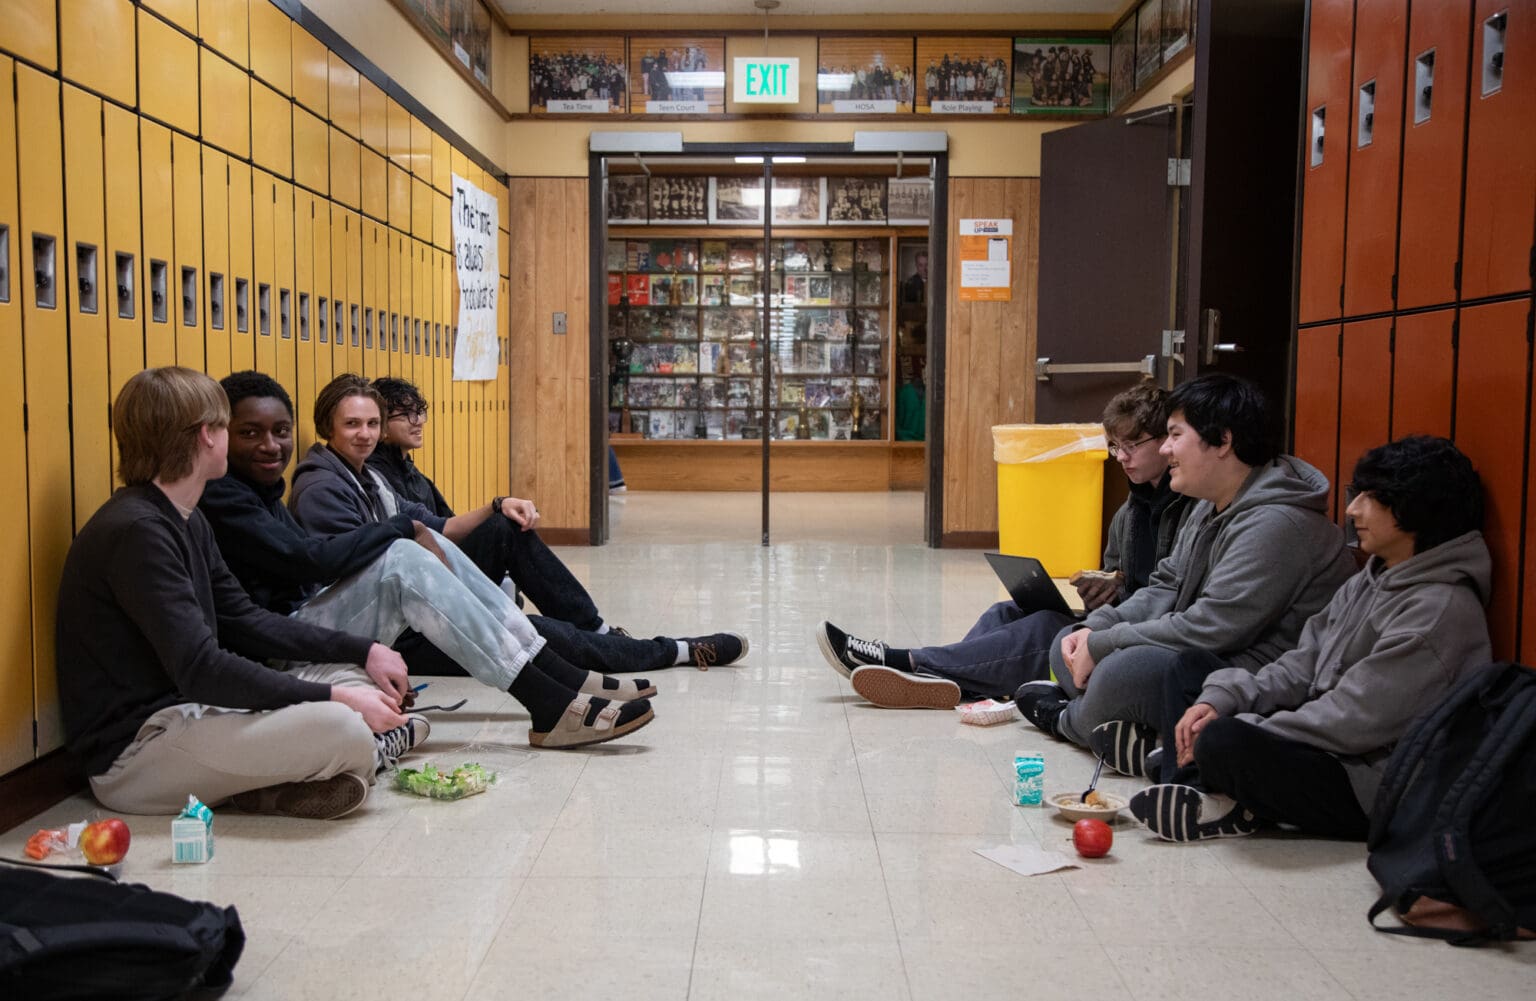 A group of students eat their lunch in the hallway outside the cafeteria with their backs to the lockers.